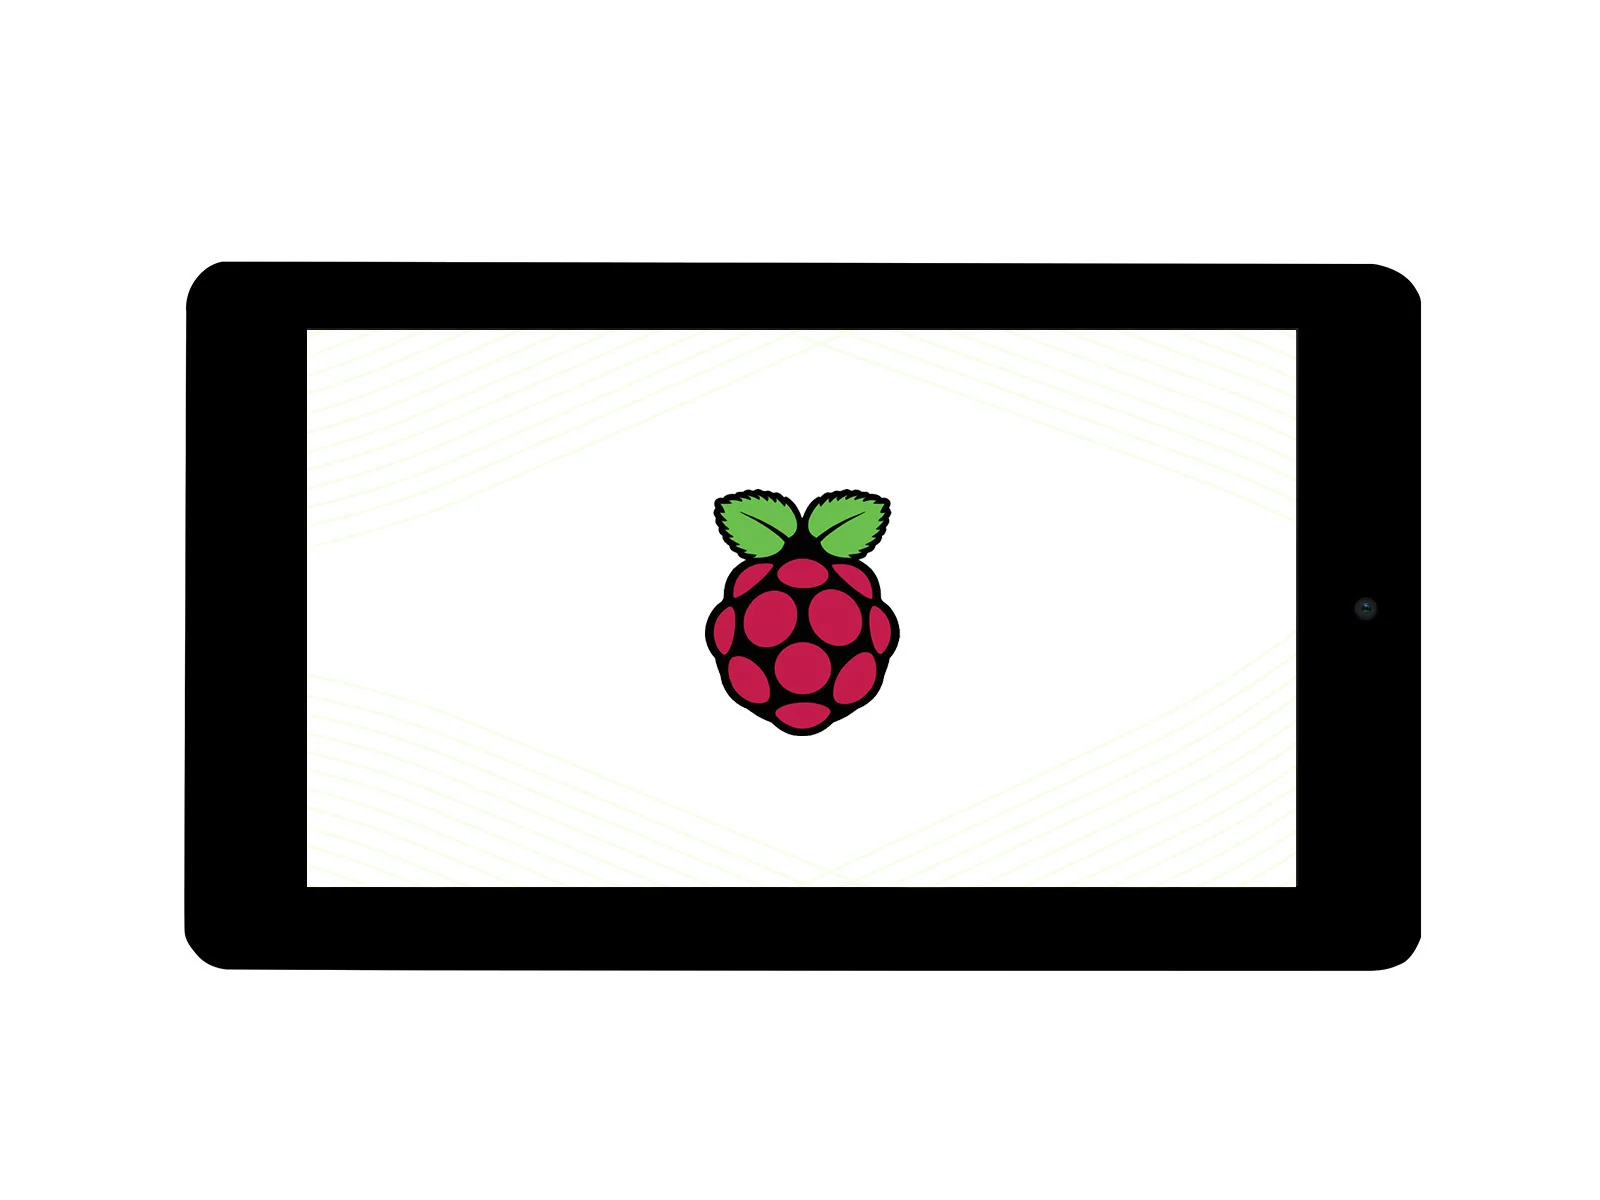 

7inch Capacitive Touch Display for Raspberry Pi,With 5MP Front Camera, 800×480, DSI,Supports Pi 4B/3B+/3A+/3B/2B/B+/A+, CM3/3+/4